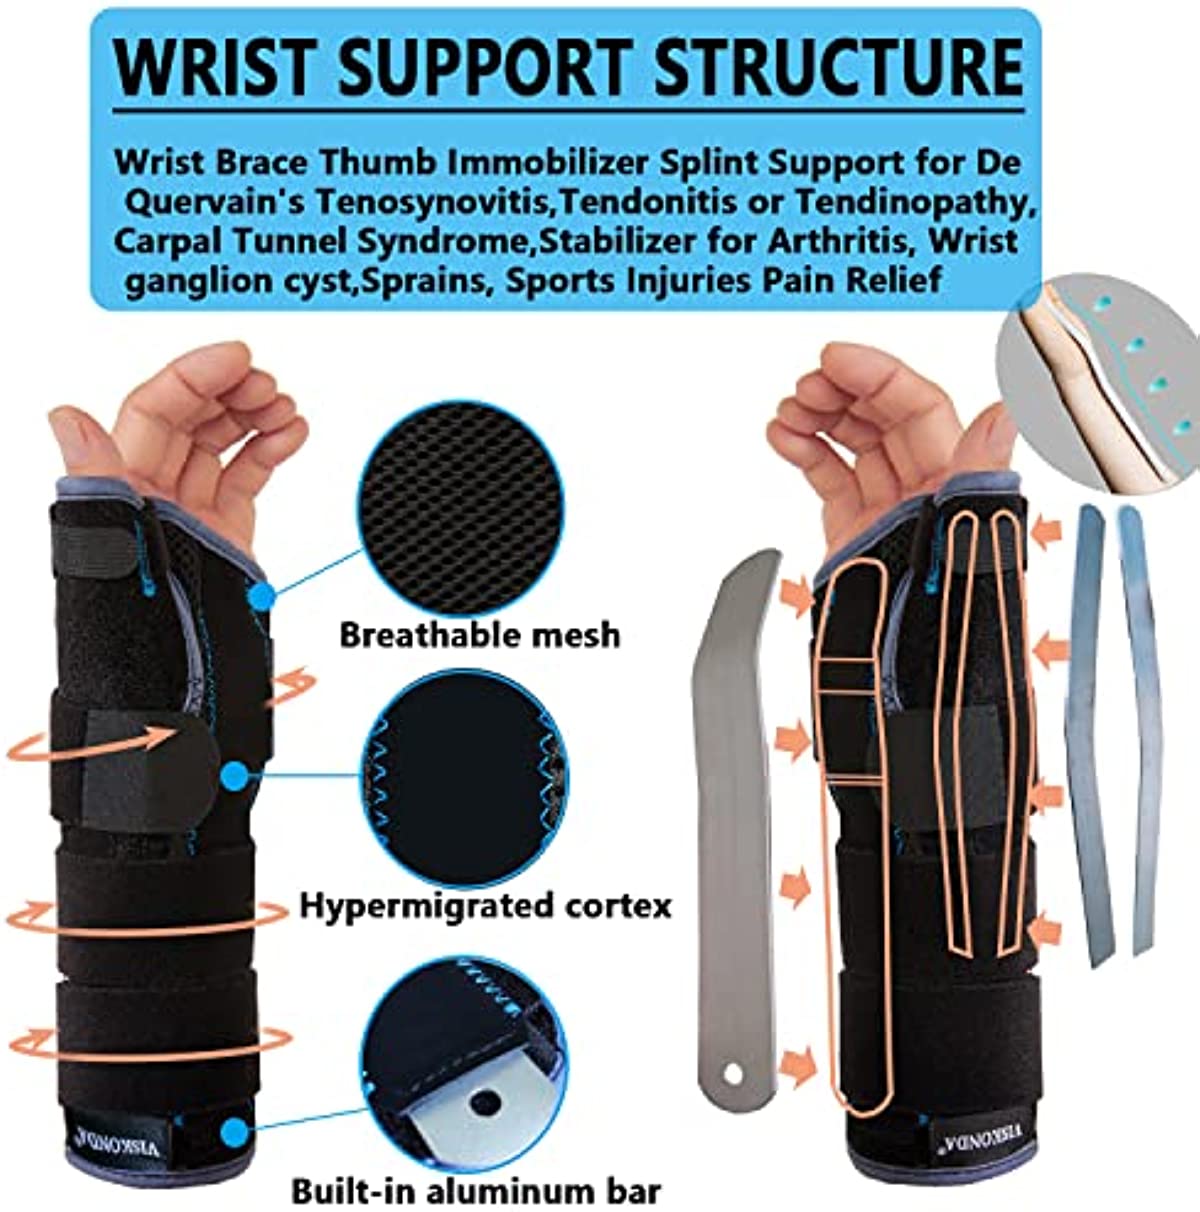 VISKONDA Wrist Brace Thumb Immobilizer Splint Support for De Quervain\'s Tenosynovitis,Carpal Tunnel Syndrome,Stabilizer for Arthritis,Wrist ganglion cyst,Sprains,Sports Injuries Pain Relief